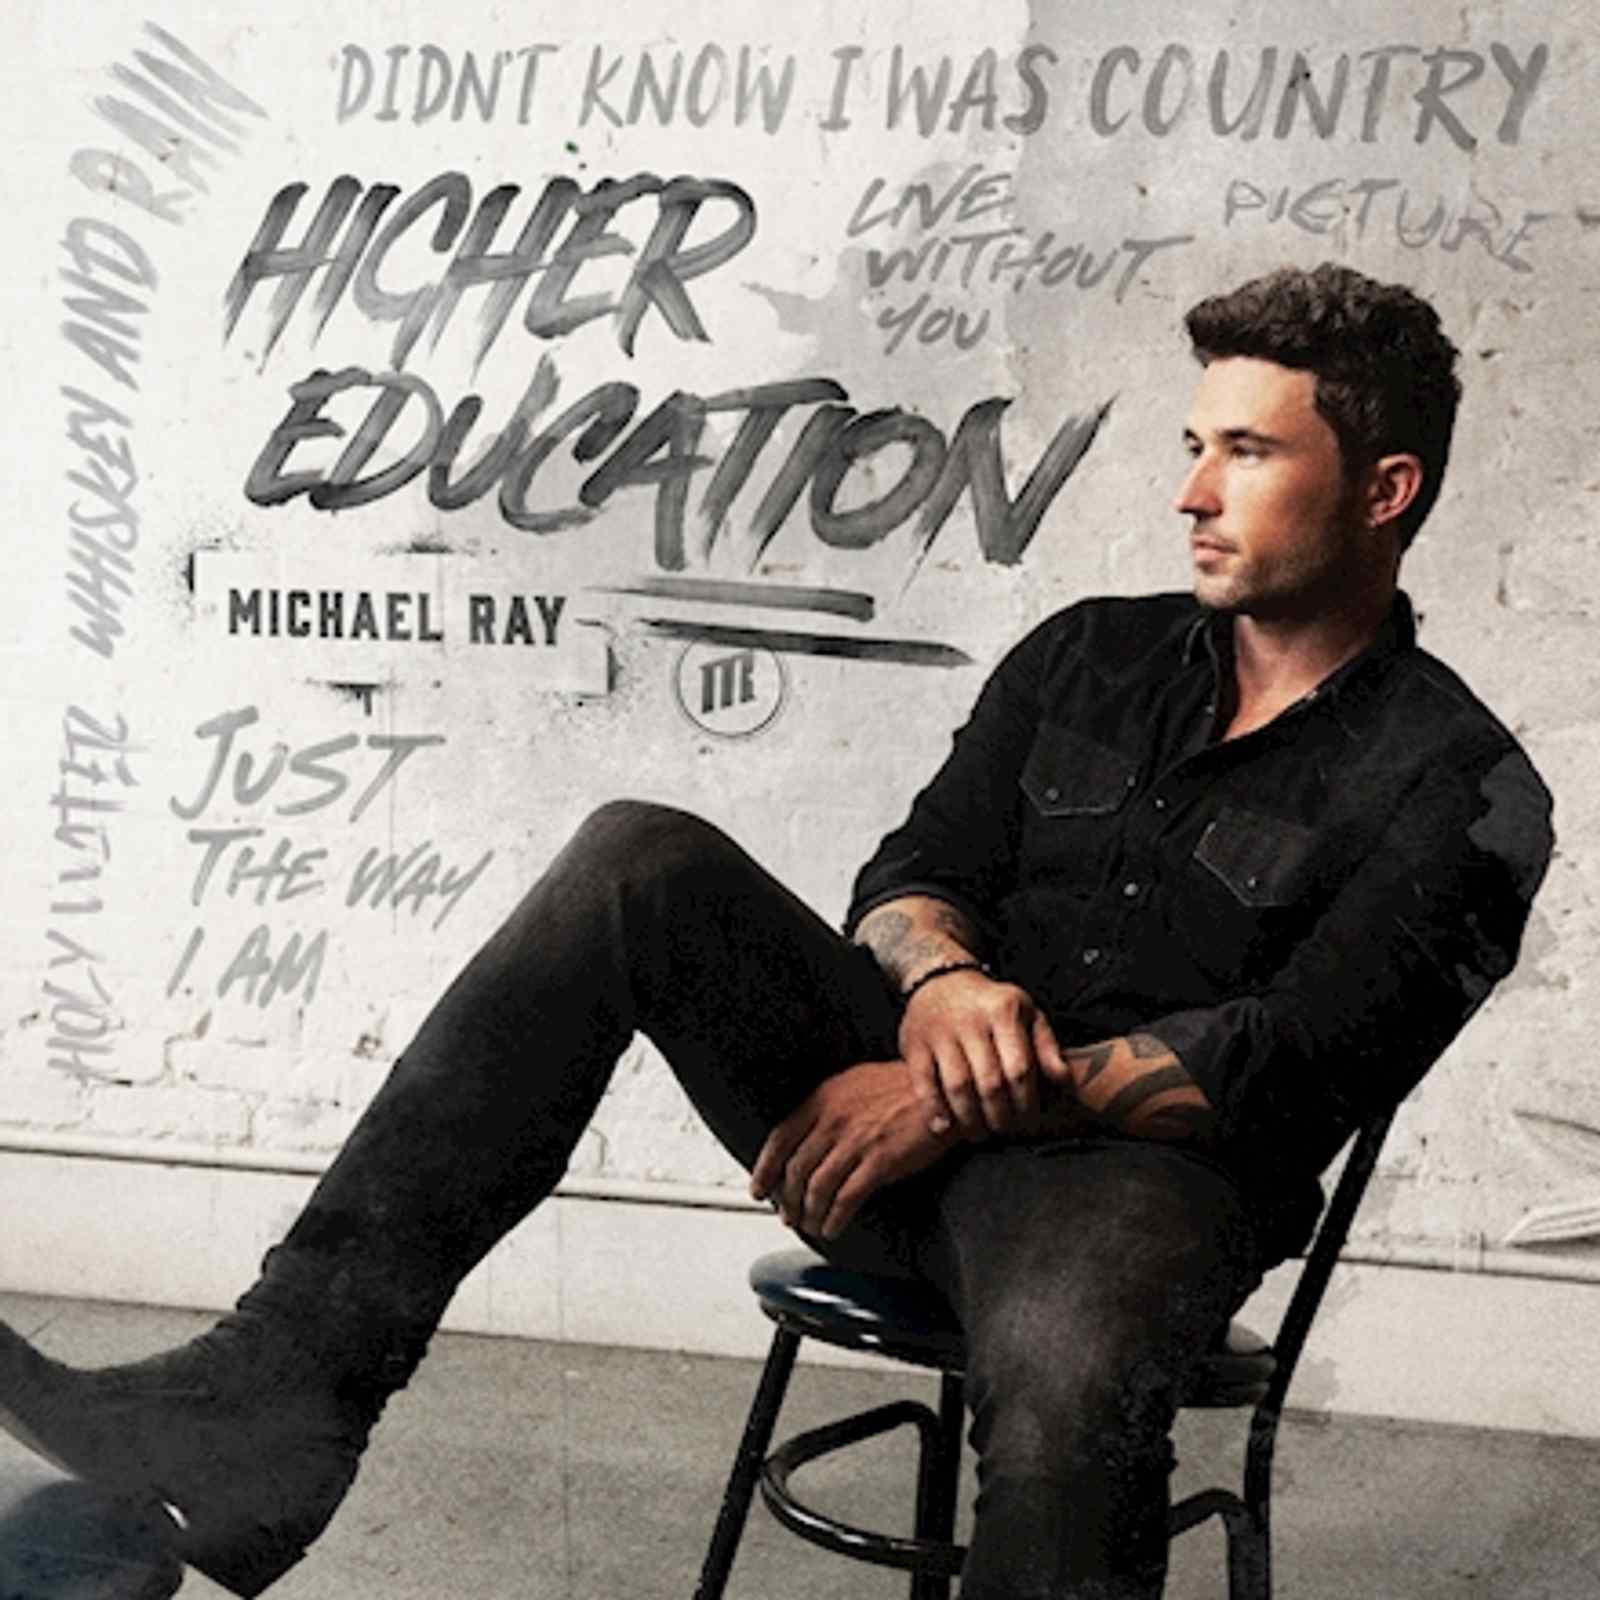 Higher Education EP by Michael Ray